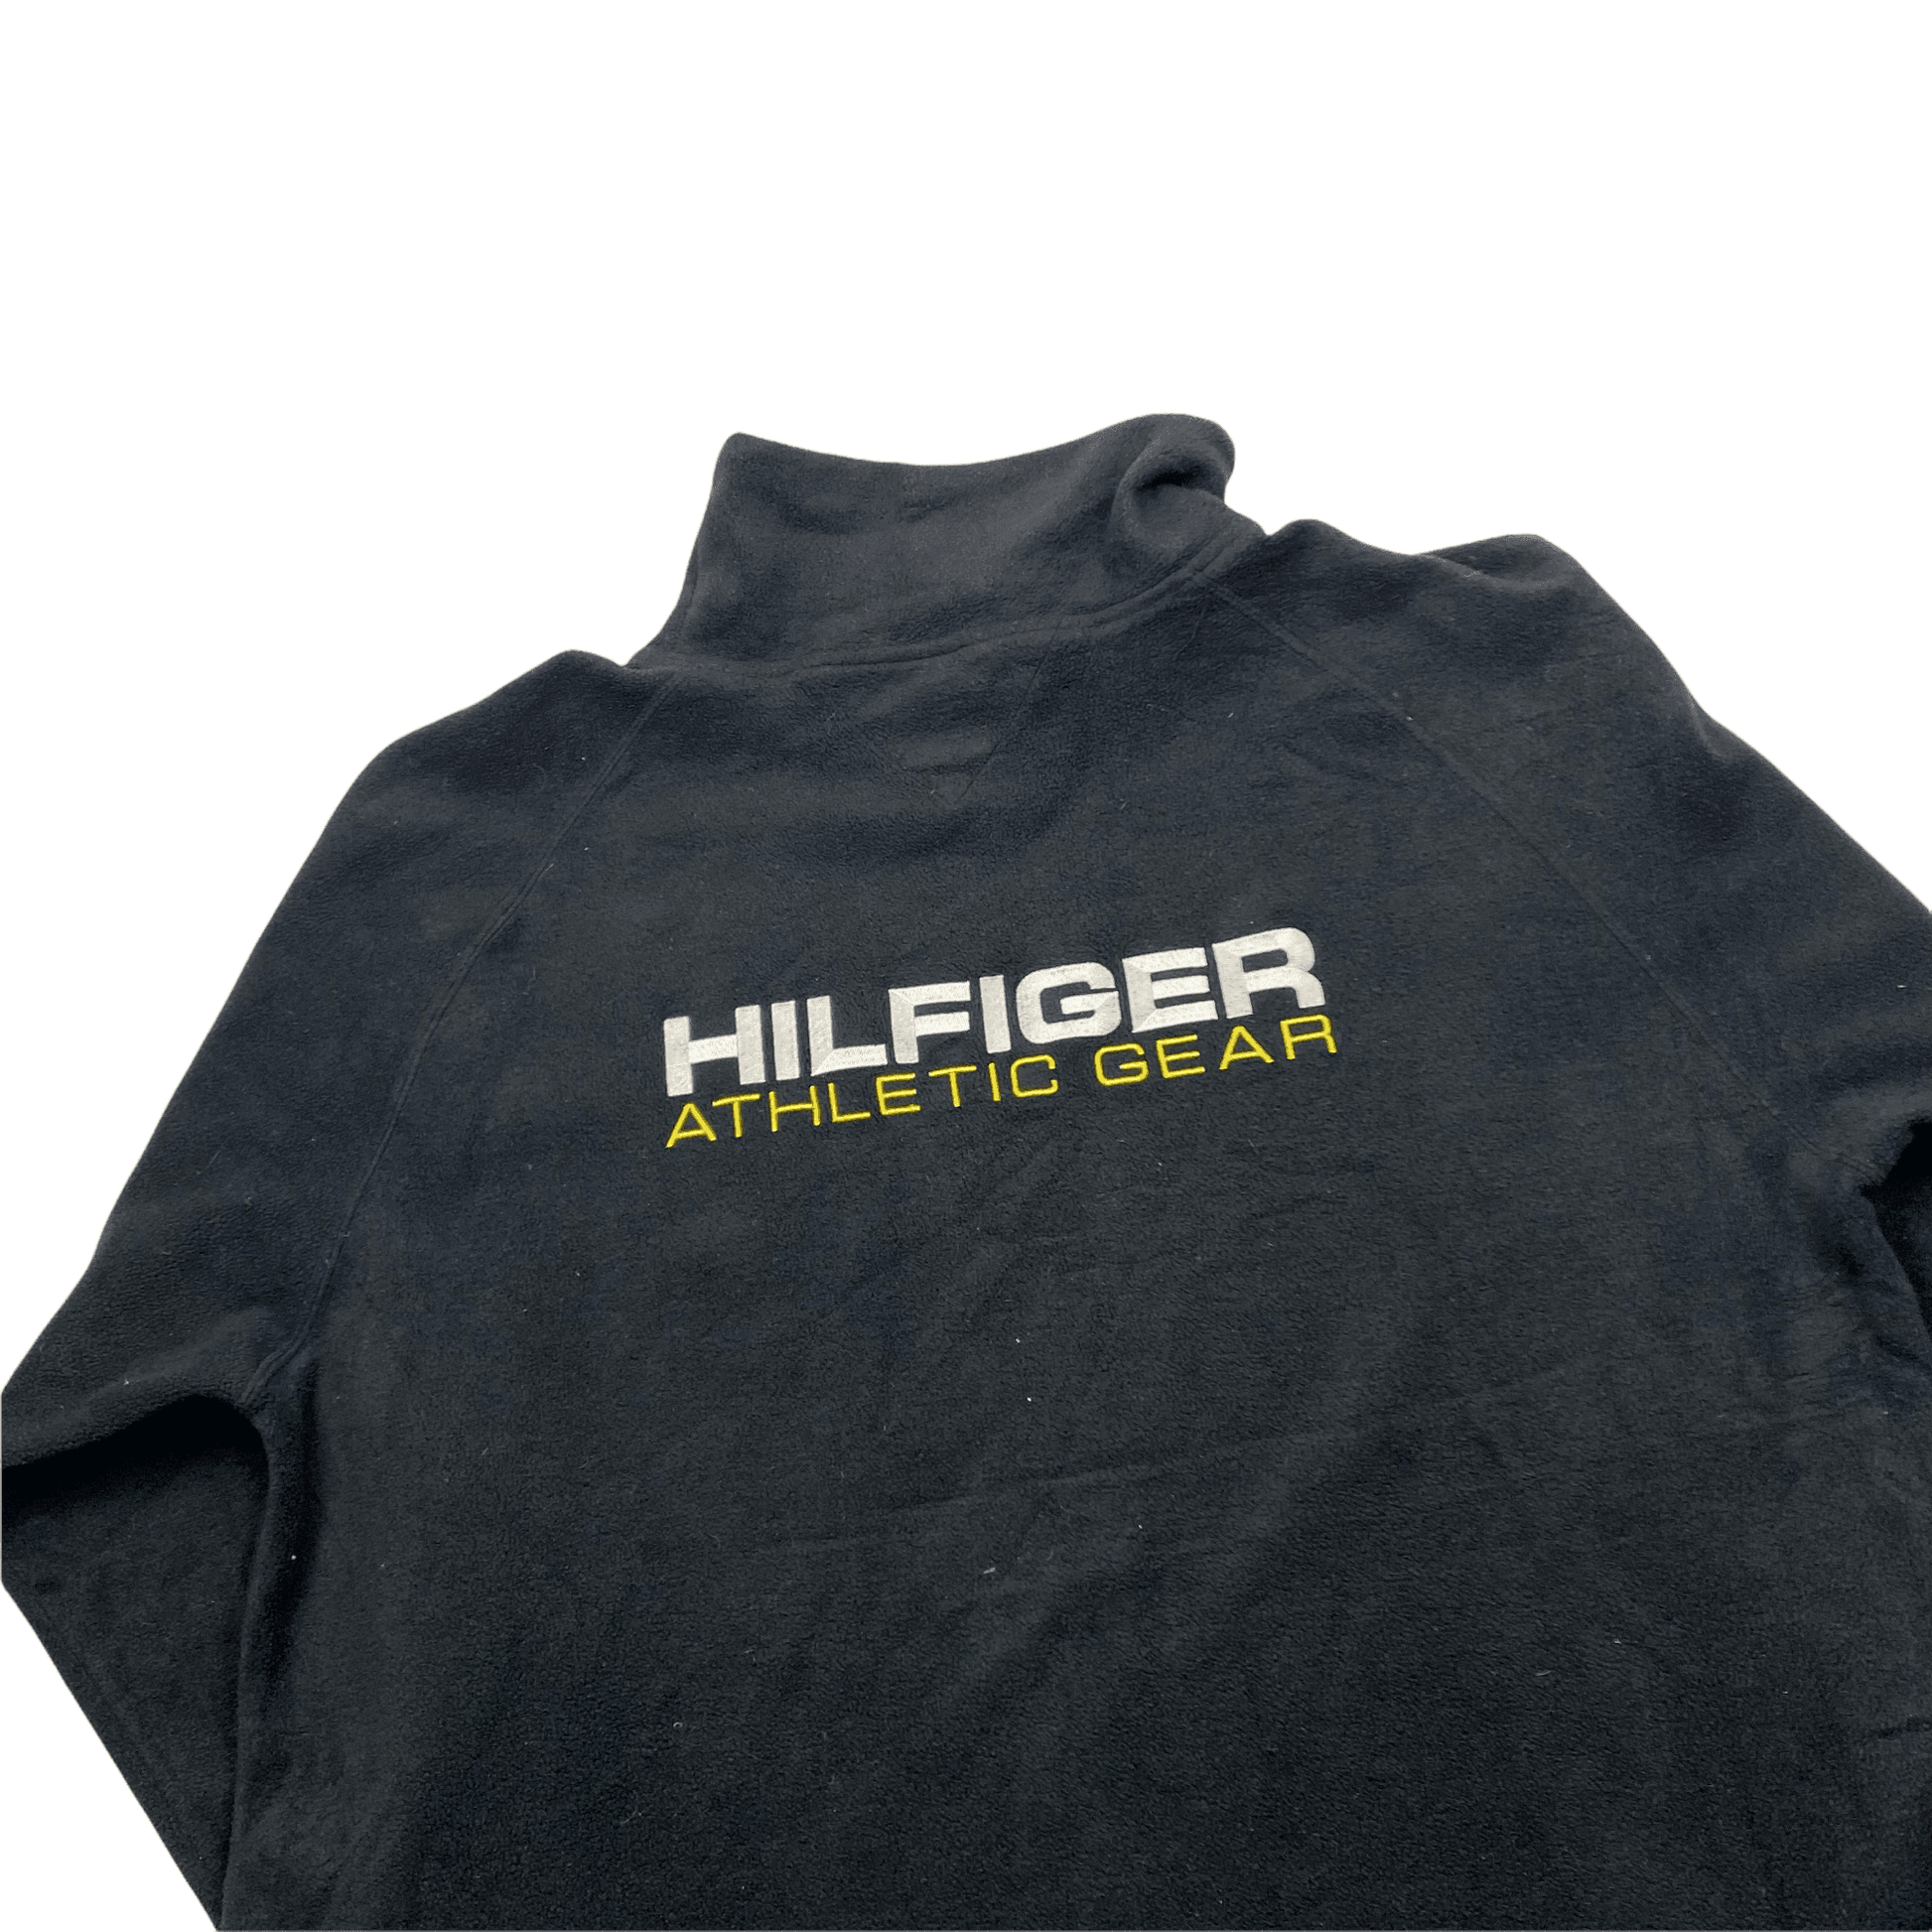 Vintage 90s Black Tommy Hilfiger Spell-Out Fleece Sweatshirt - Large (Recommended Size - Extra Large) - The Streetwear Studio